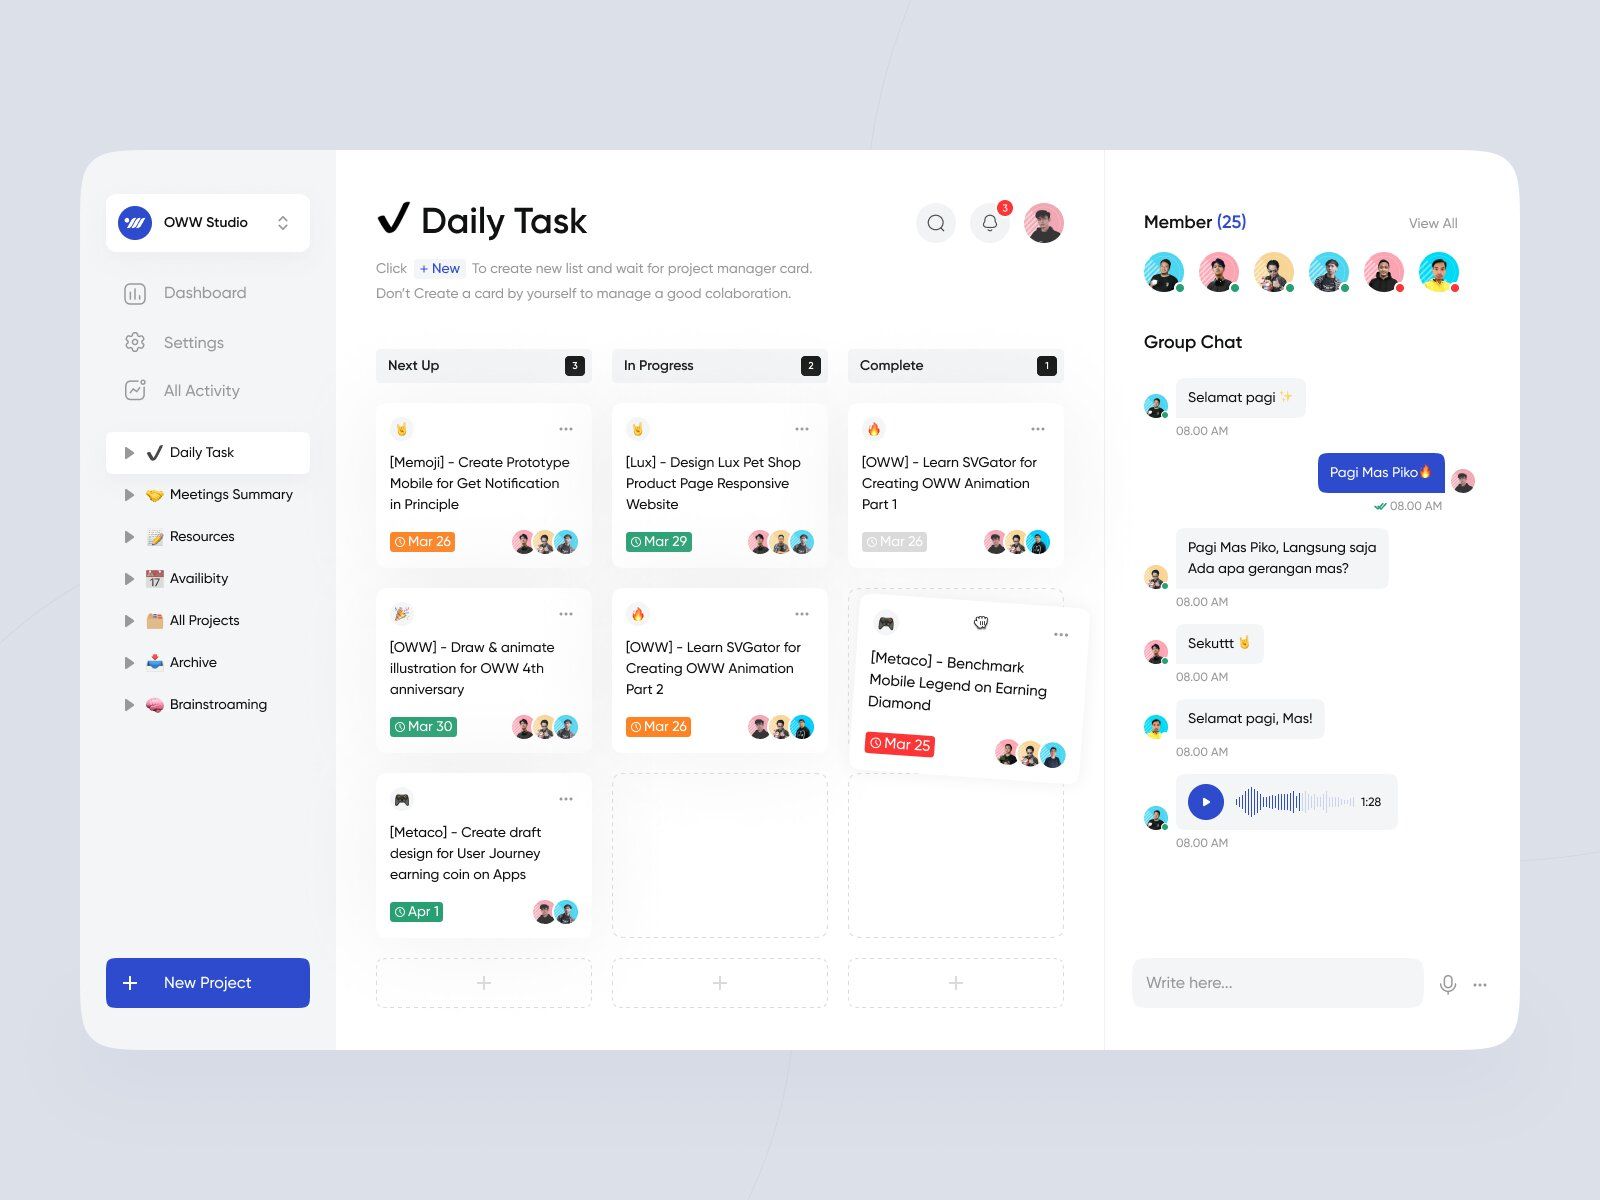 If you decide to build a task management app or web-product, 3rd-party integrations can help you with project management and teams collaboration by covering additional features 